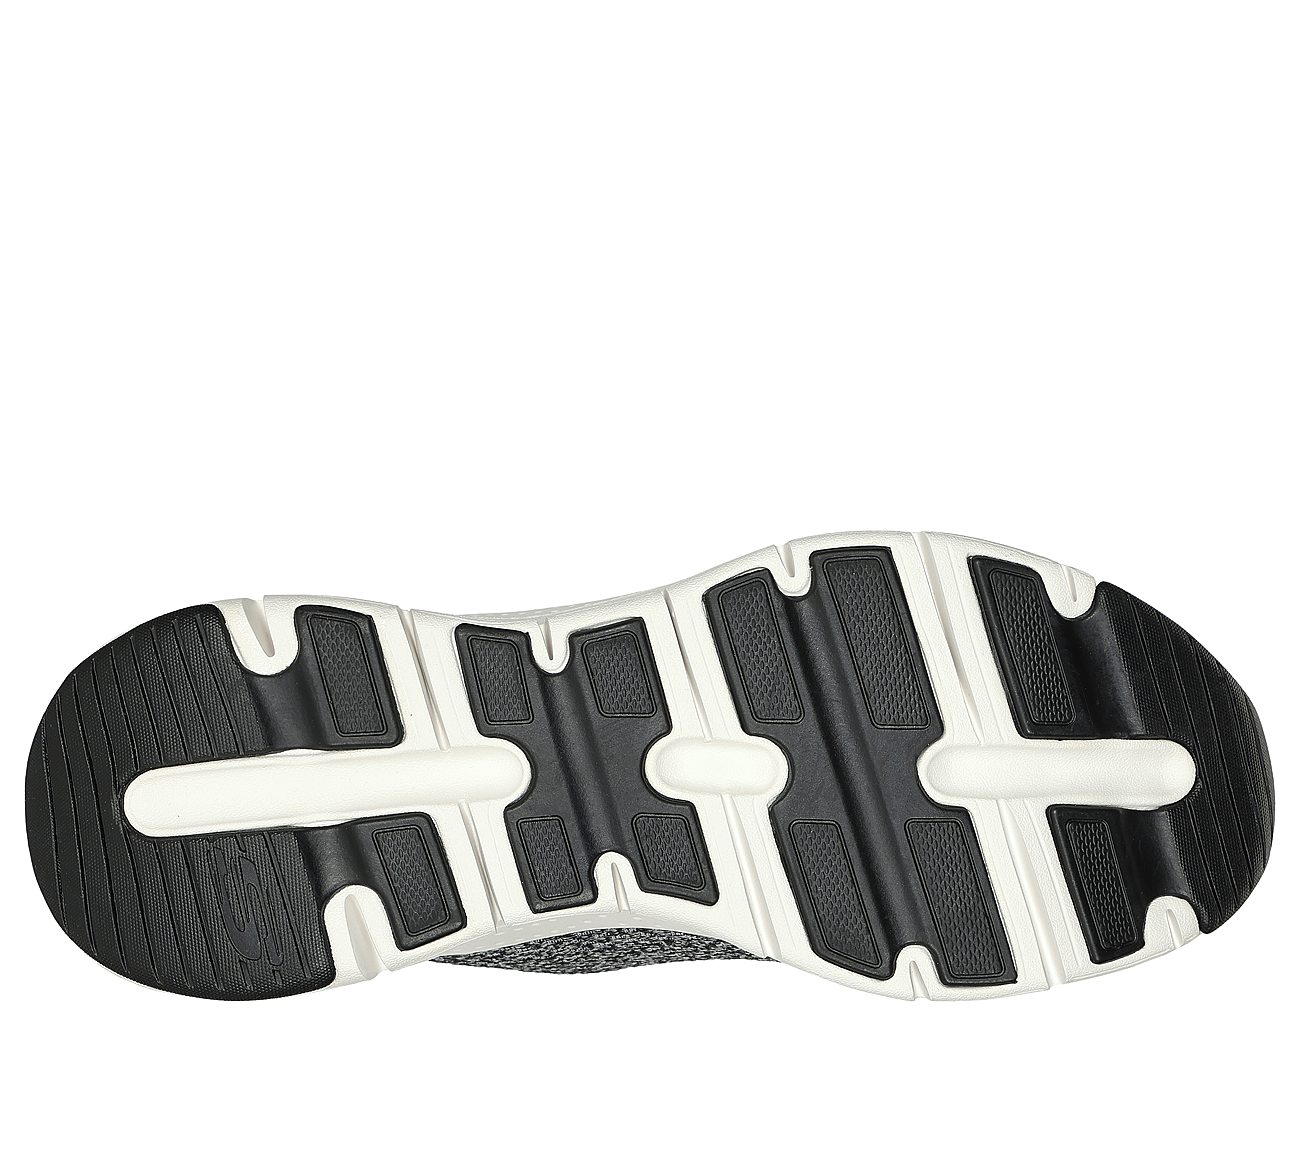 ARCH FIT, WHITE BLACK Footwear Bottom View